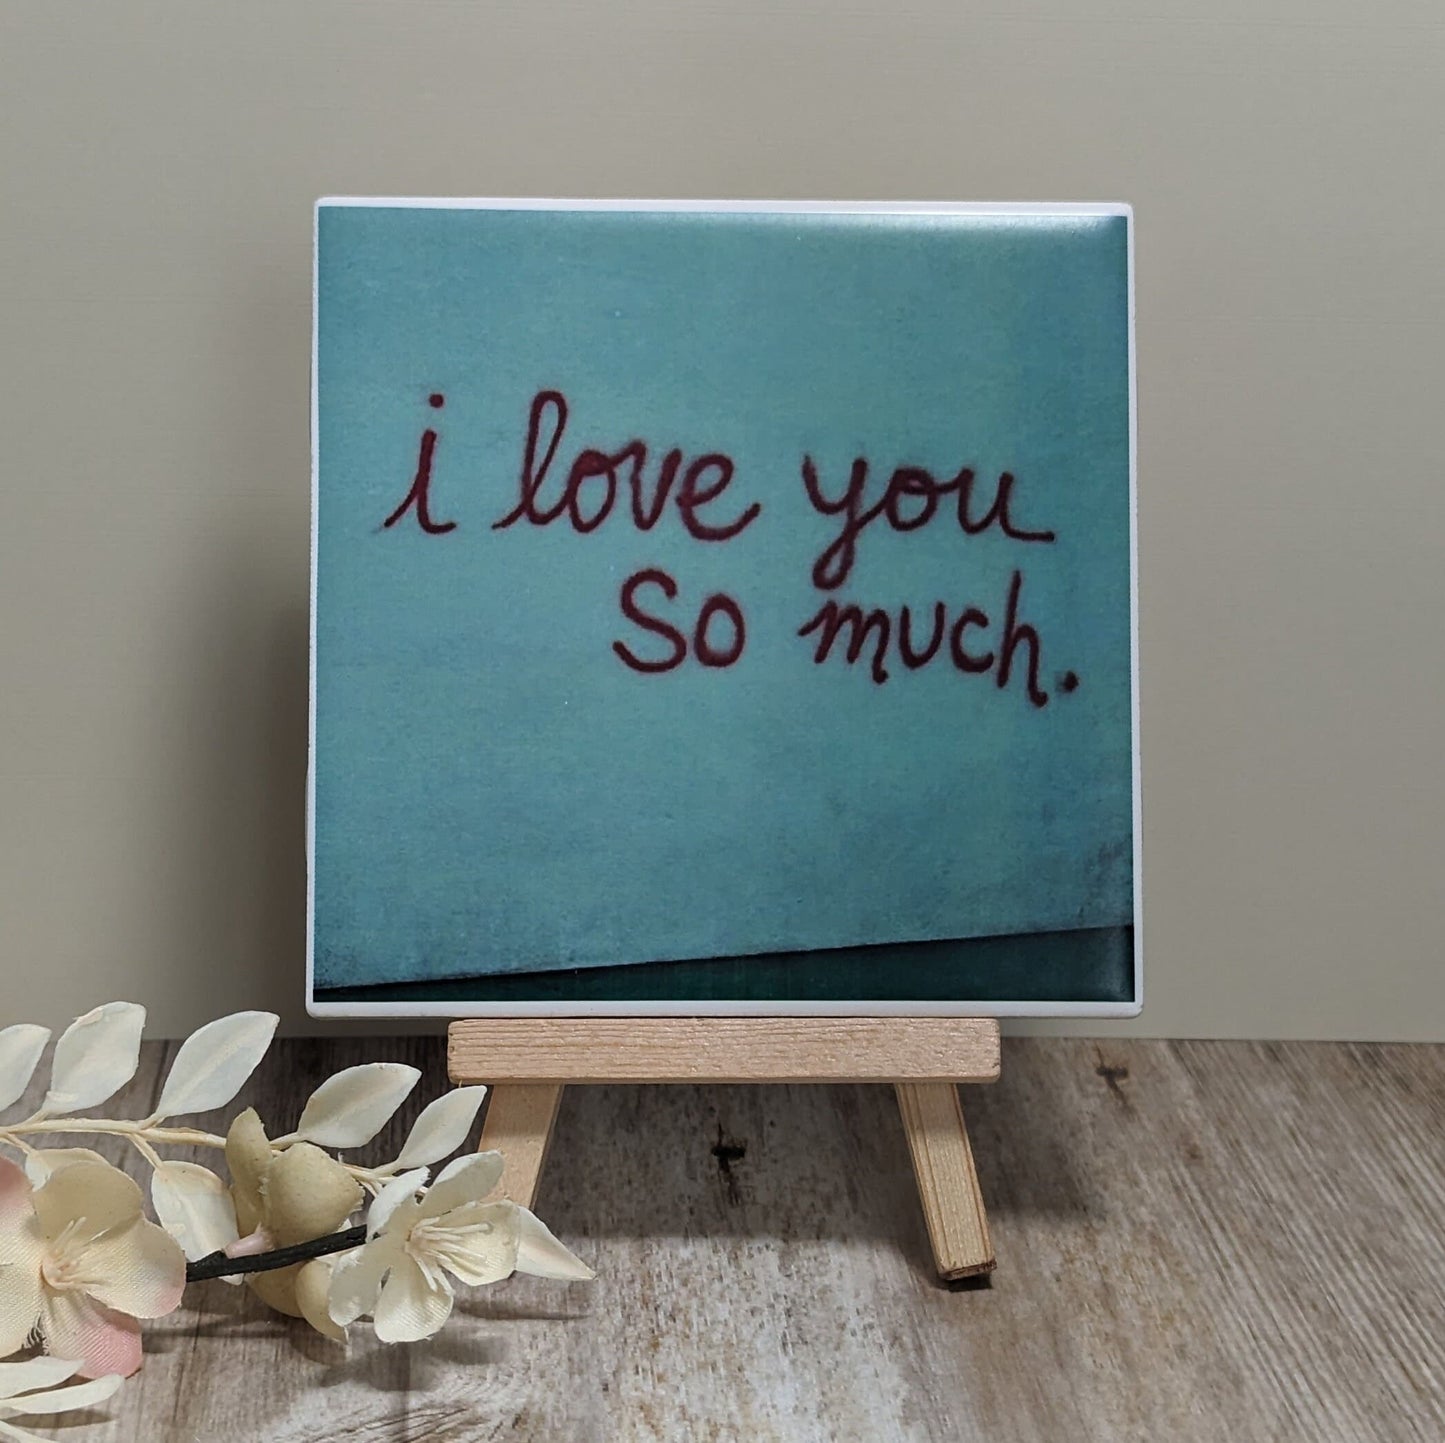 I Love You So Much Austin Texas Mural Easel Sign - easel included, your color choice